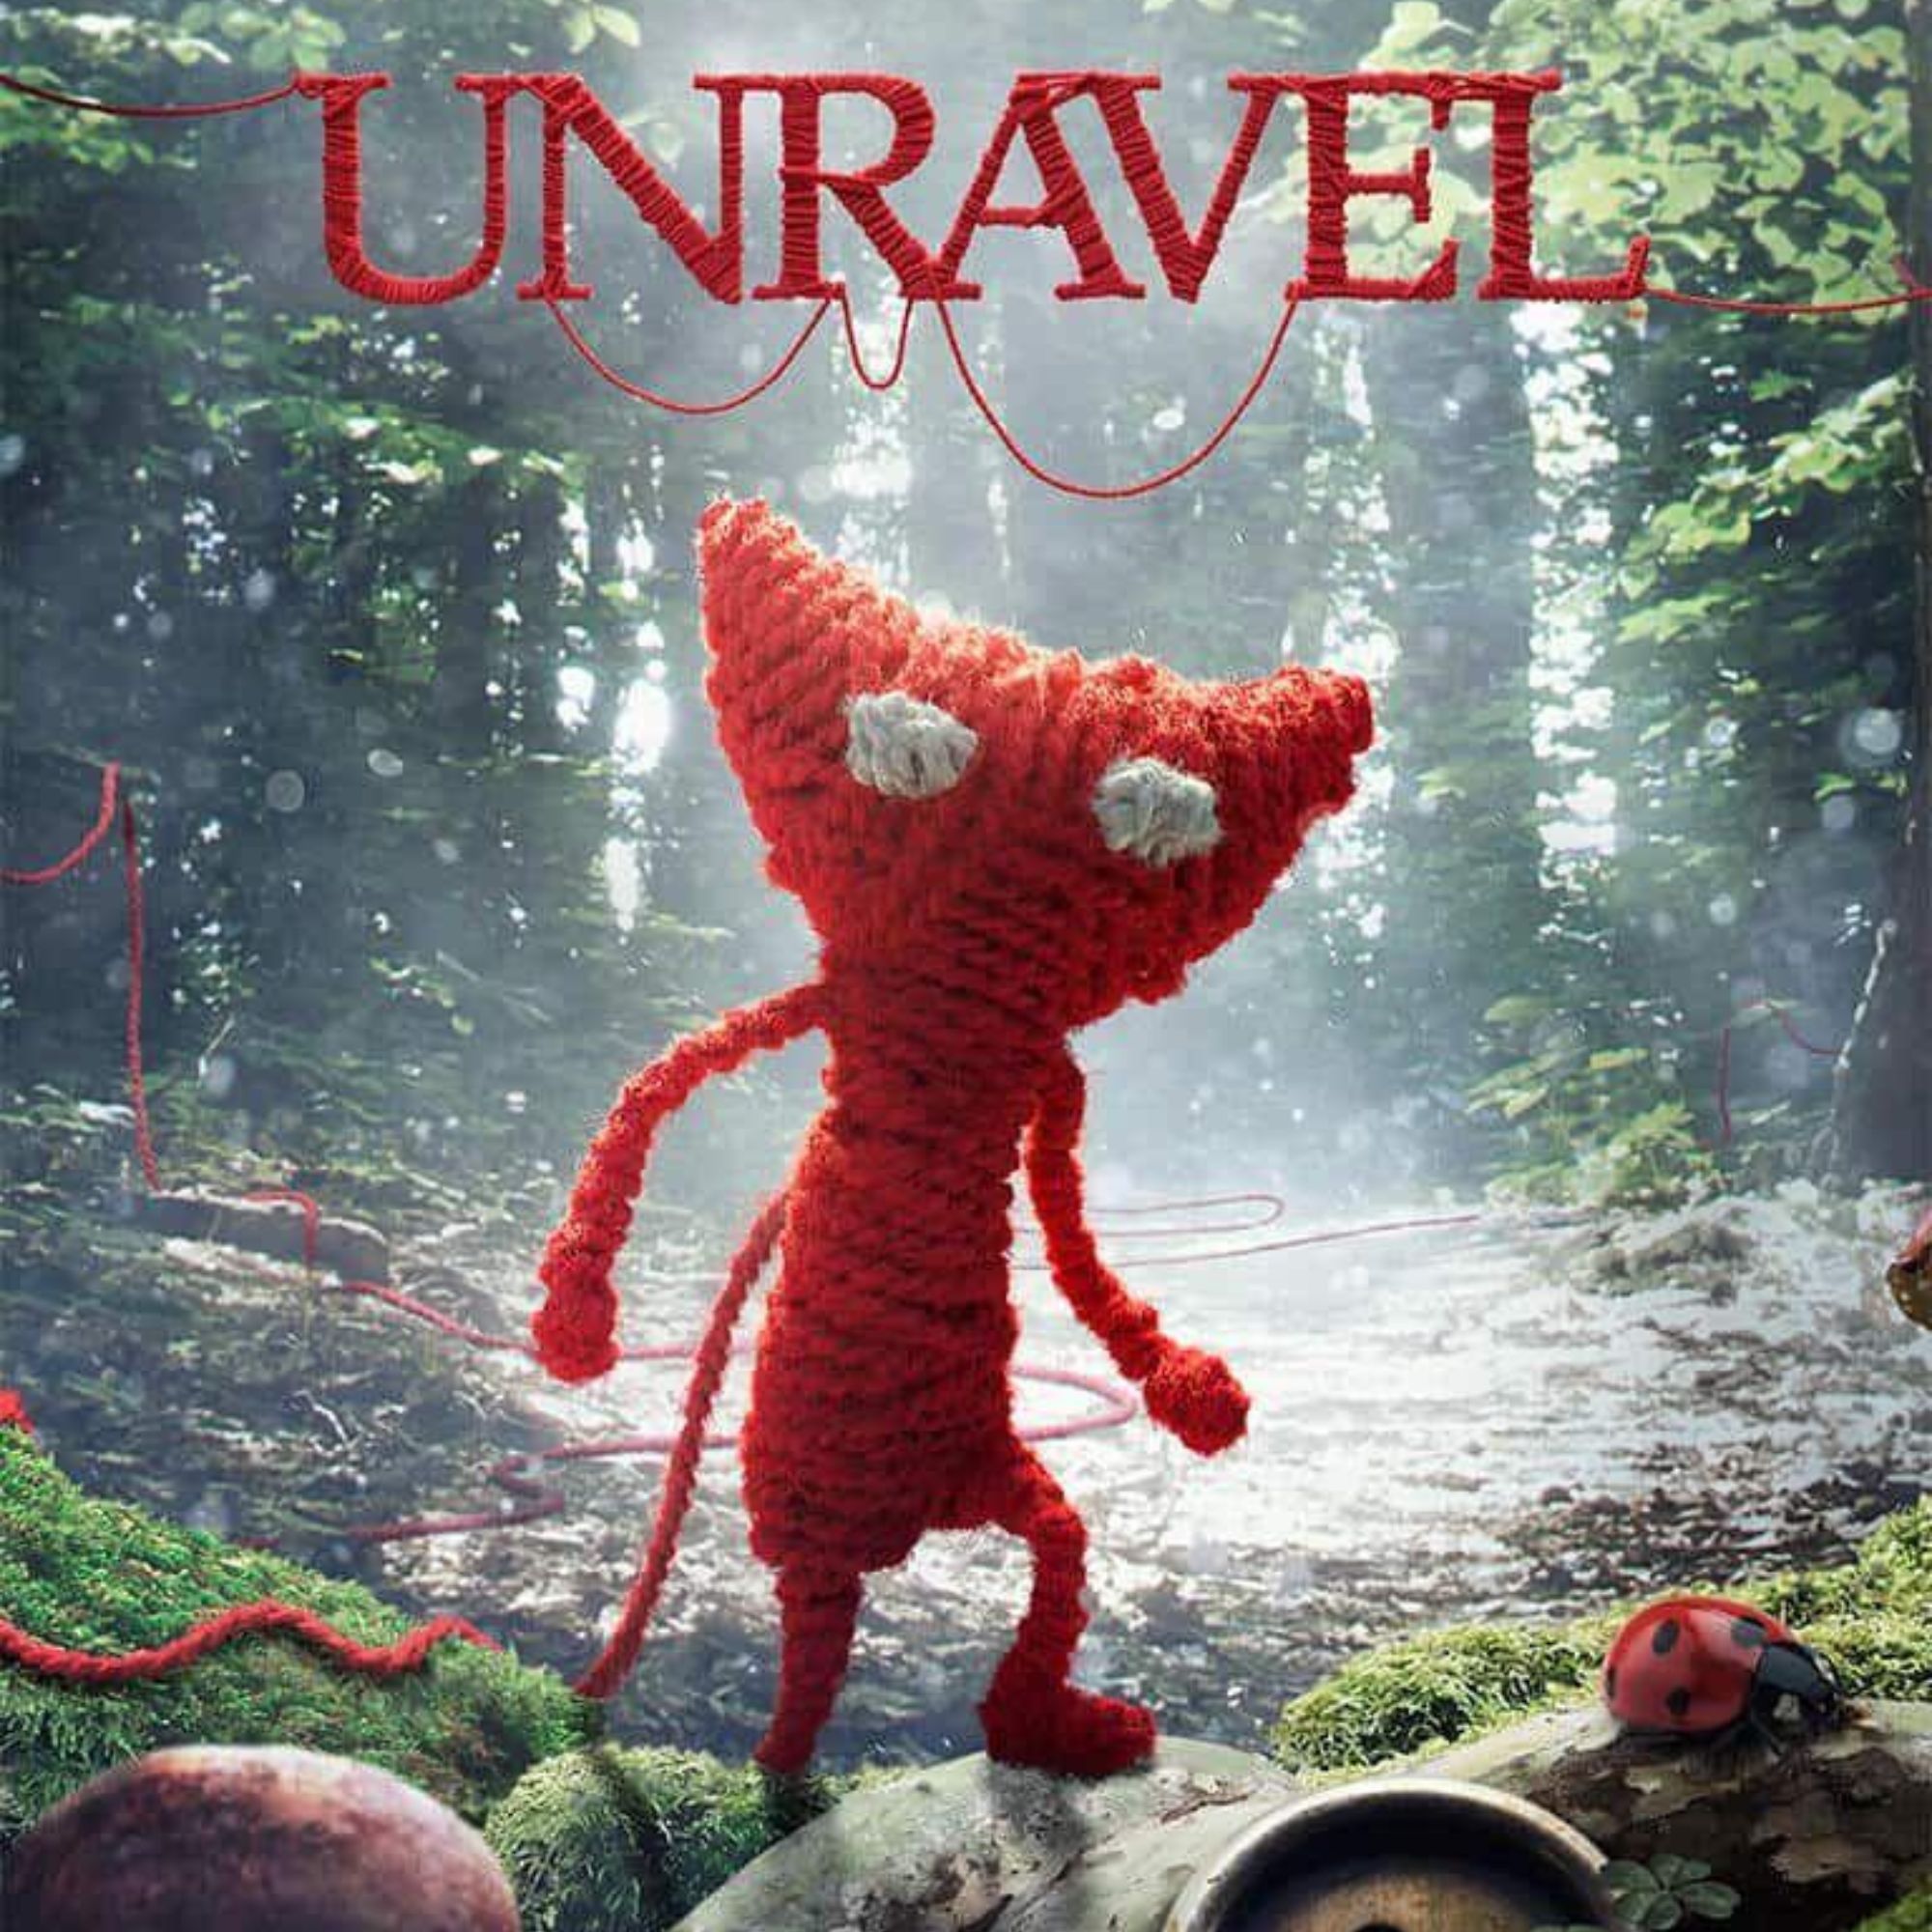 2000x2000 tag image for Unravel. A red string character walks across the woodland.